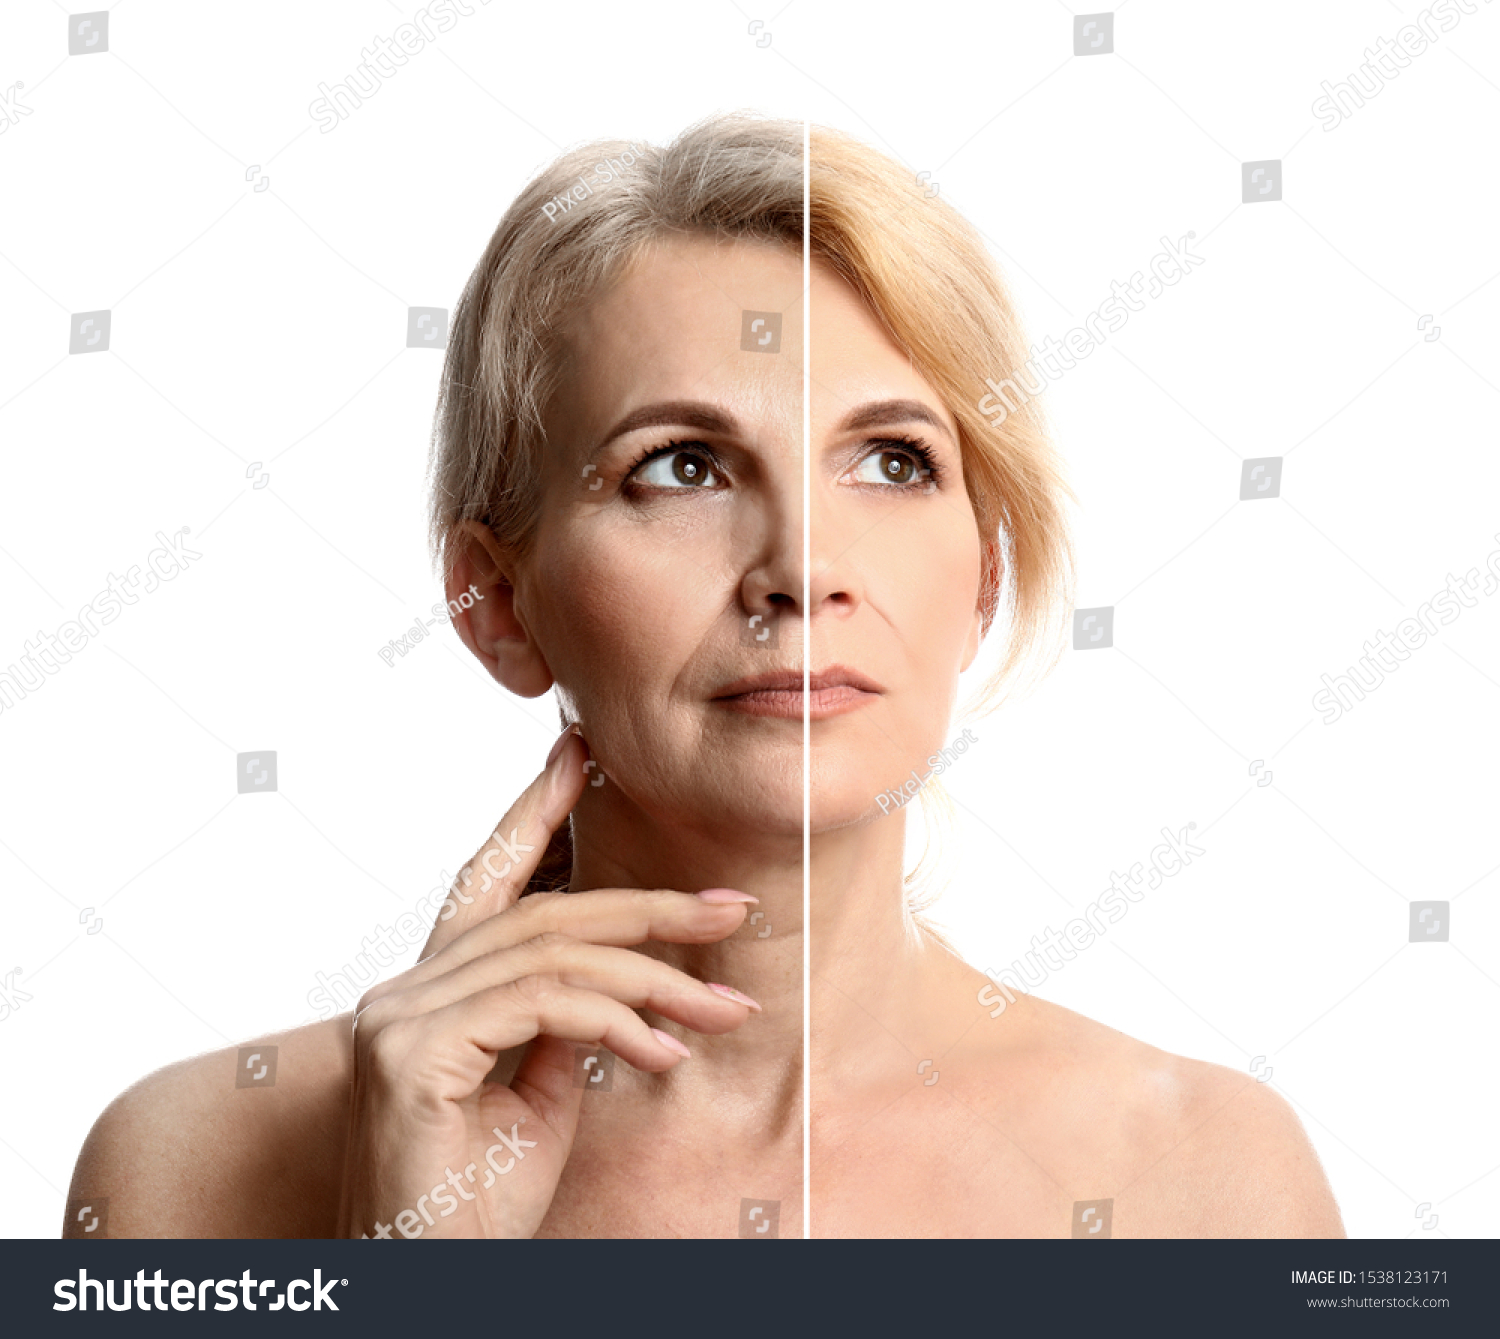 Comparison portrait of middle-aged woman on white background. Process of aging #1538123171